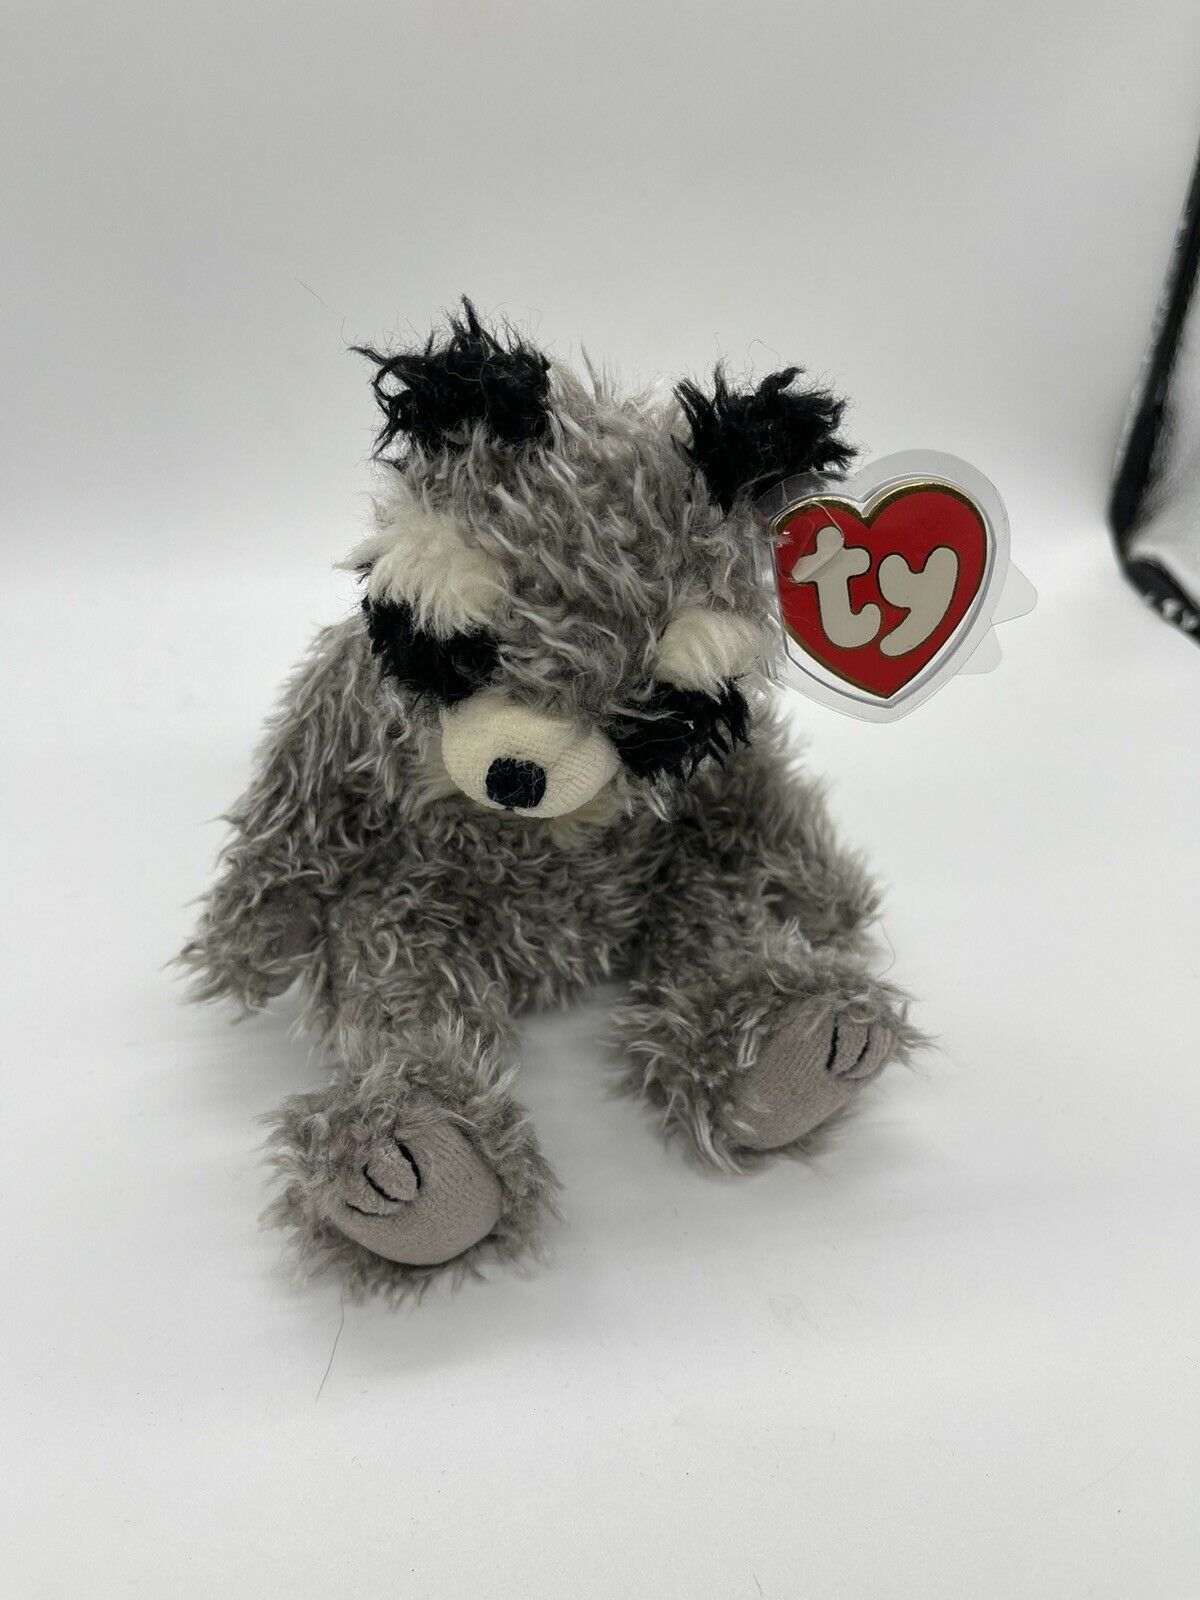 1993 Radcliffe The Racoon Ty Attic Treasures Jointed Toy Stuffed Animal